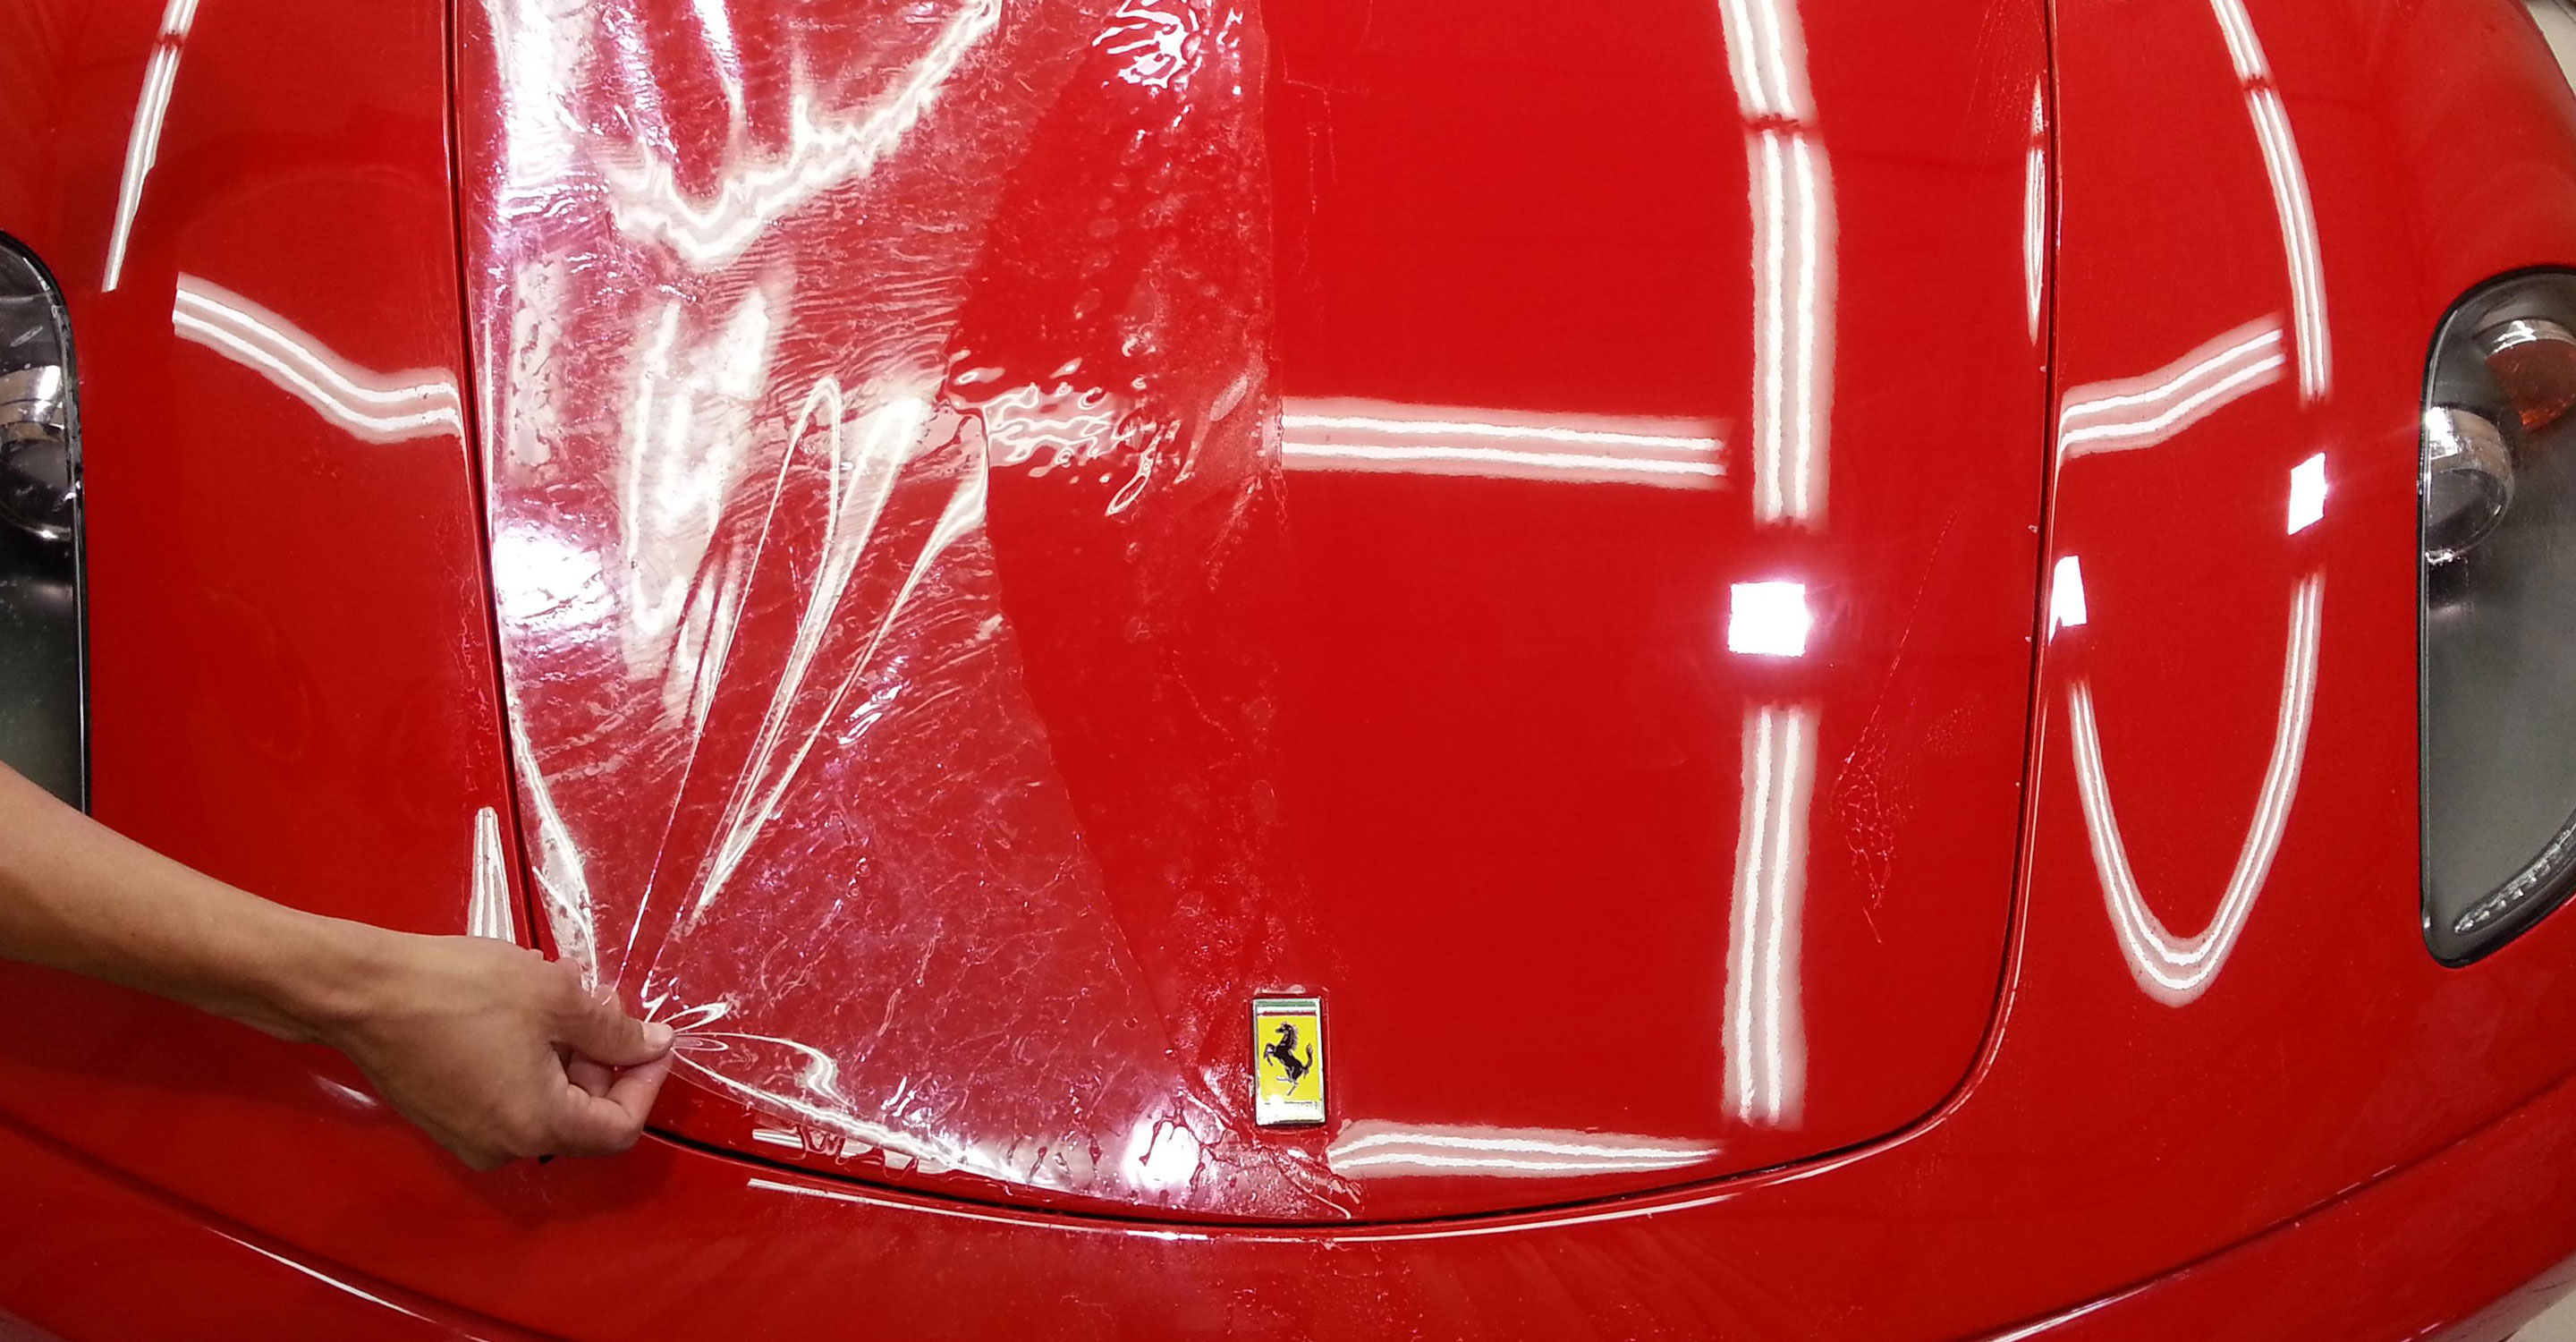 Clear UV Paint Protection Film